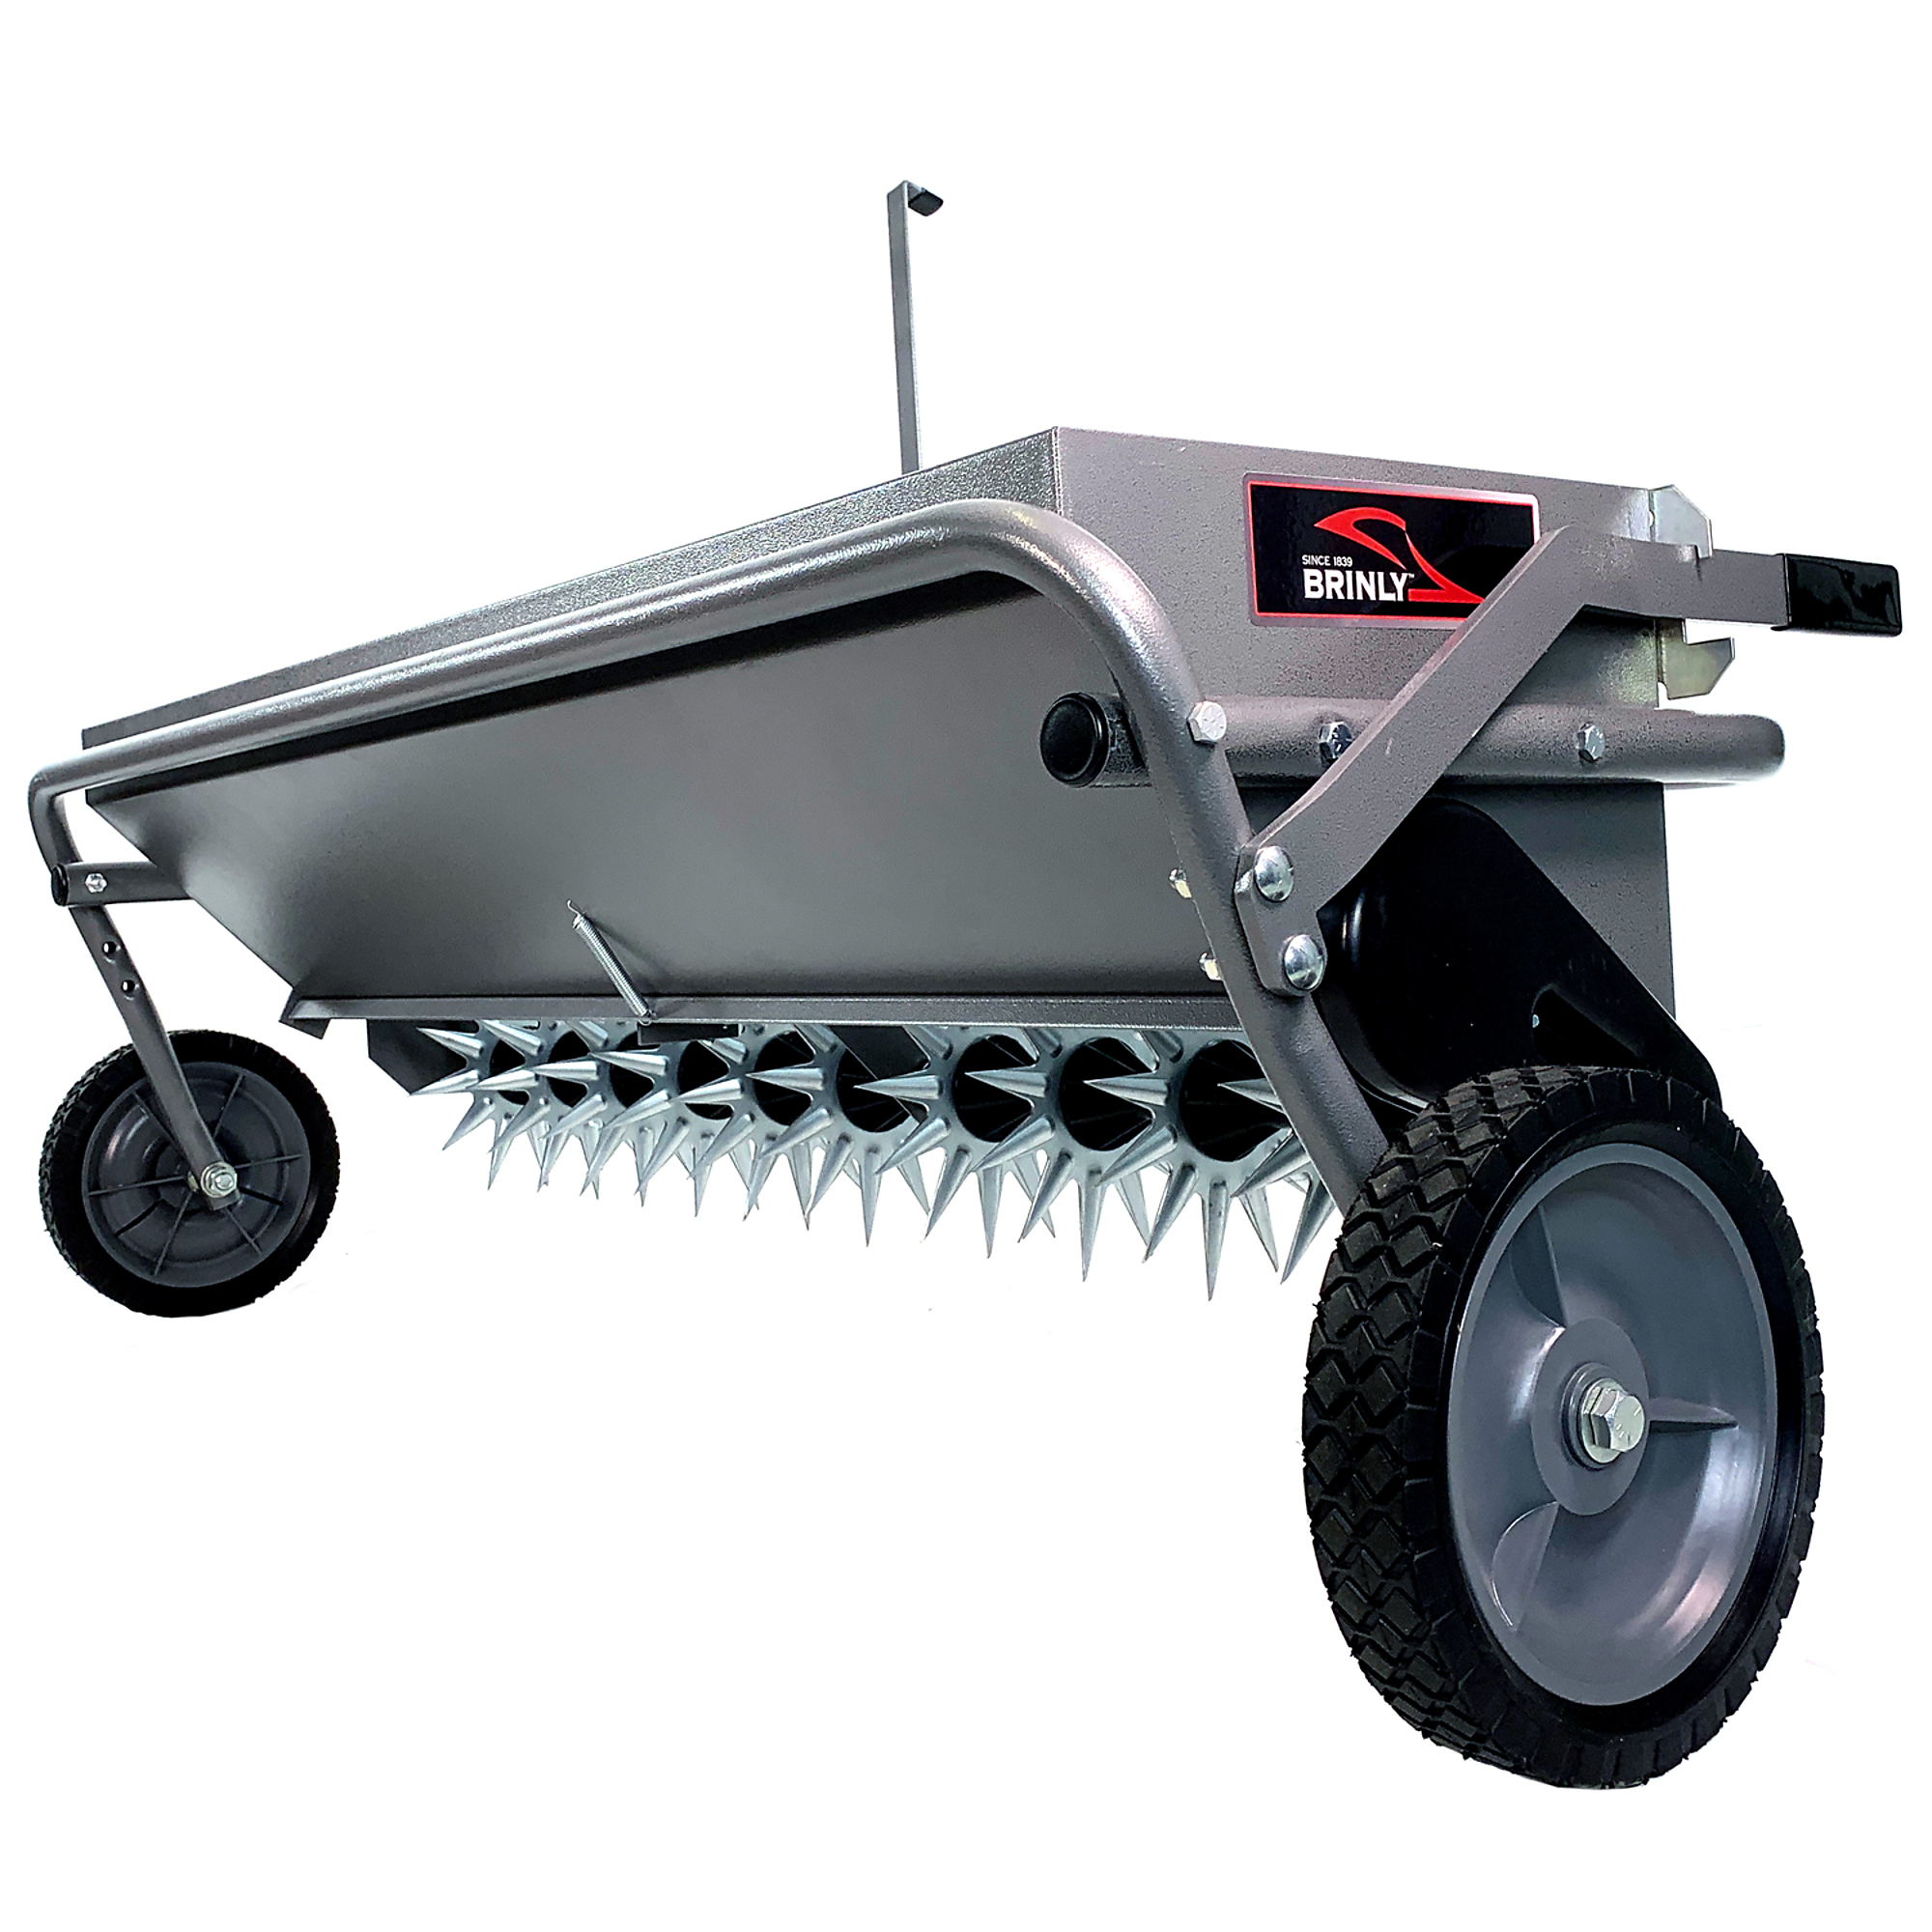 Brinly-Hardy, Brinly 40Inch Combination Aerator Spreader, Working Width 40 in, Model AS2-40BH-S